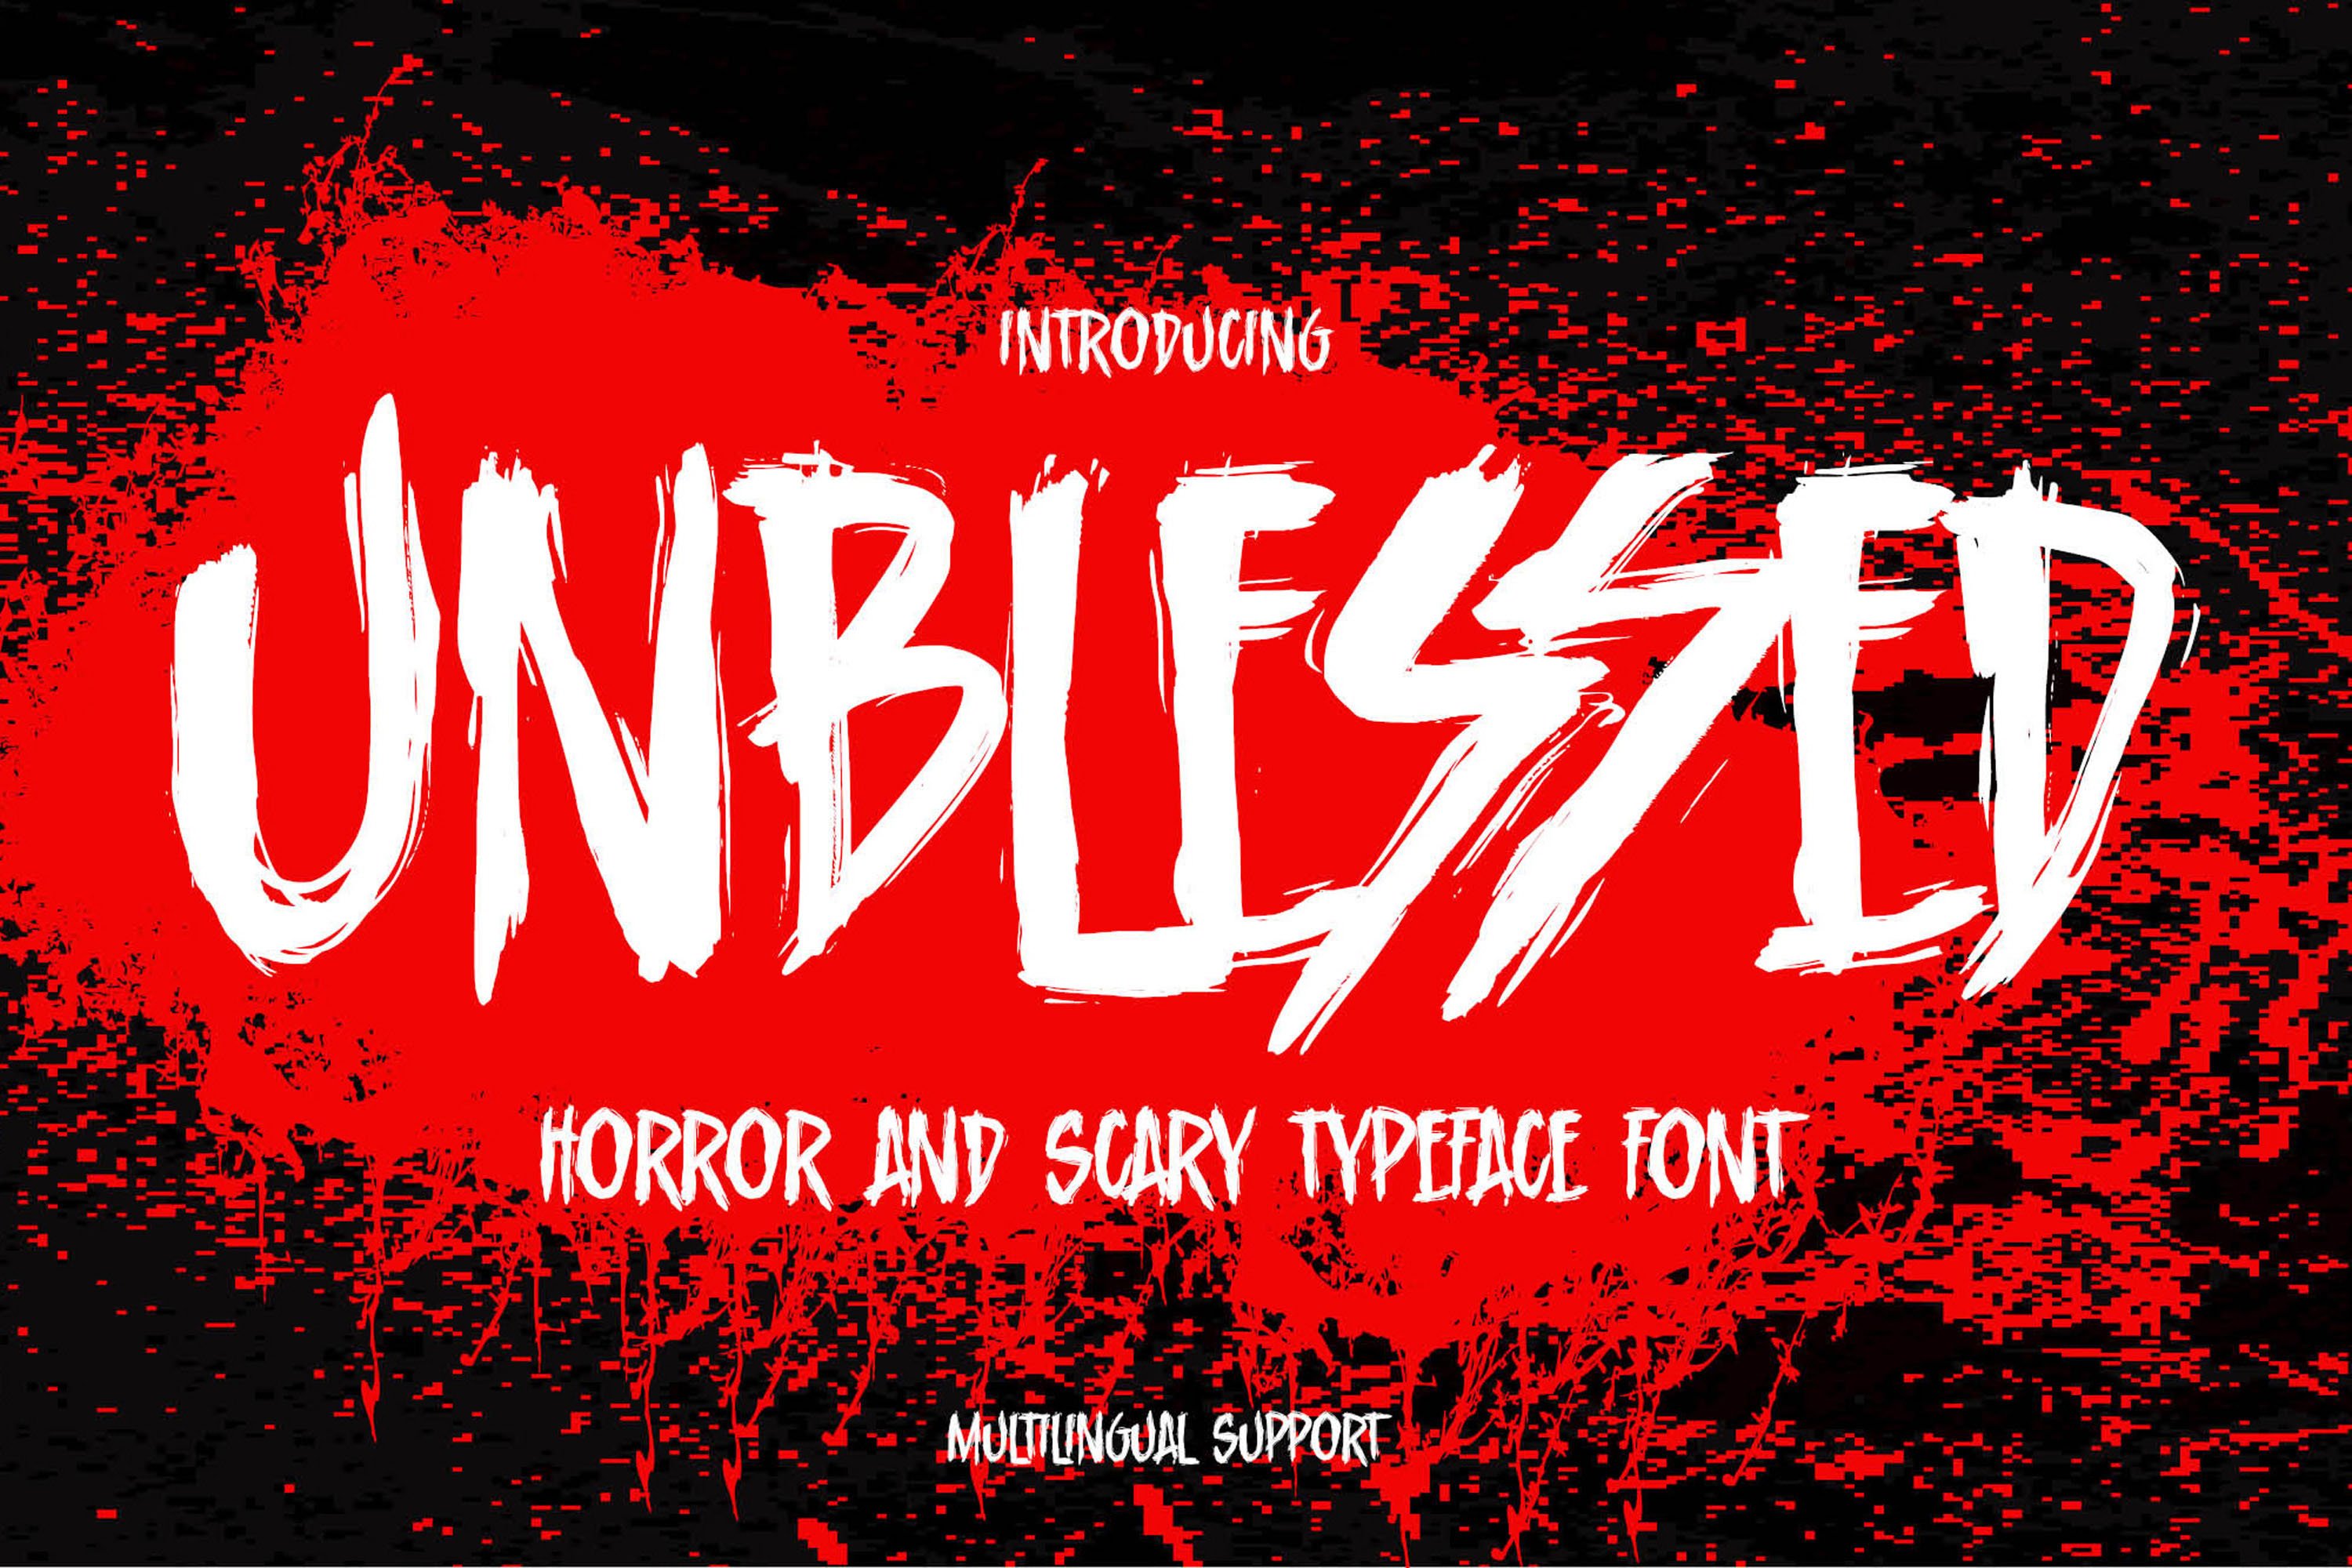 Unblessed -Horror And Scary Typeface cover image.